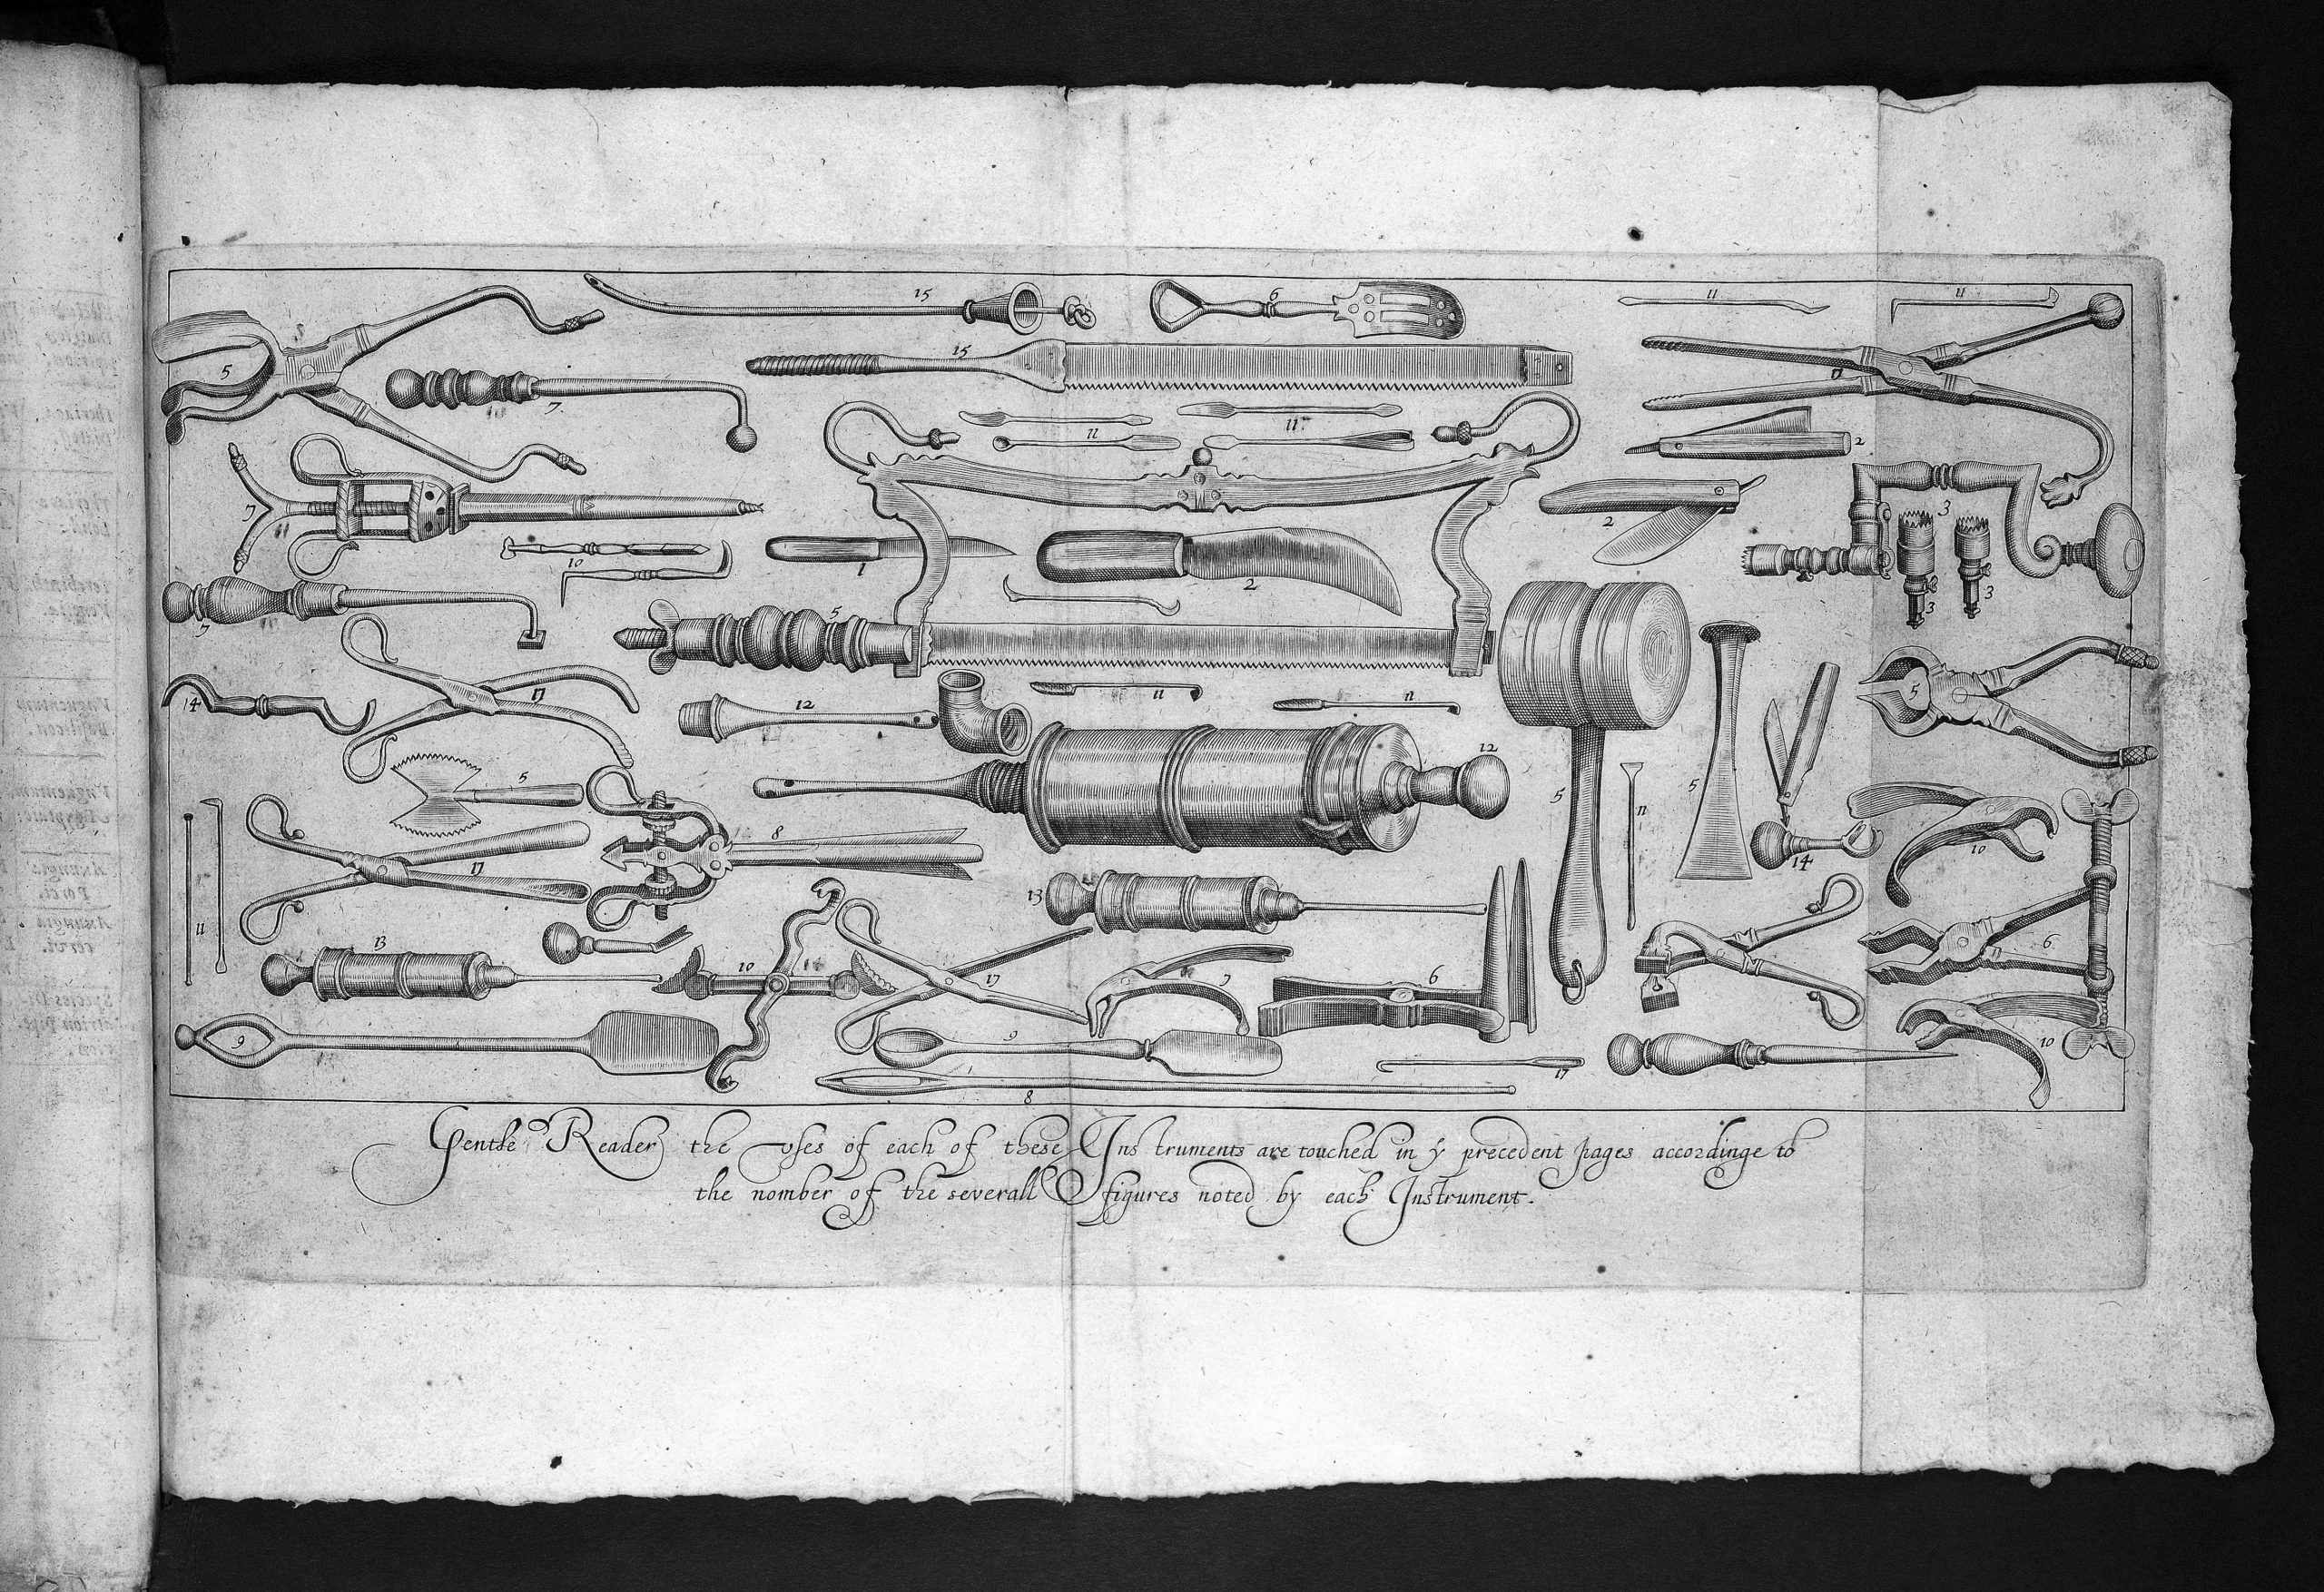 • Instruments recommended by Woodall for the sea surgeon's chest. From The Surgeons Mate or Military and Domestique Surgery [John Woodall]. Source: Wellcome Collection.